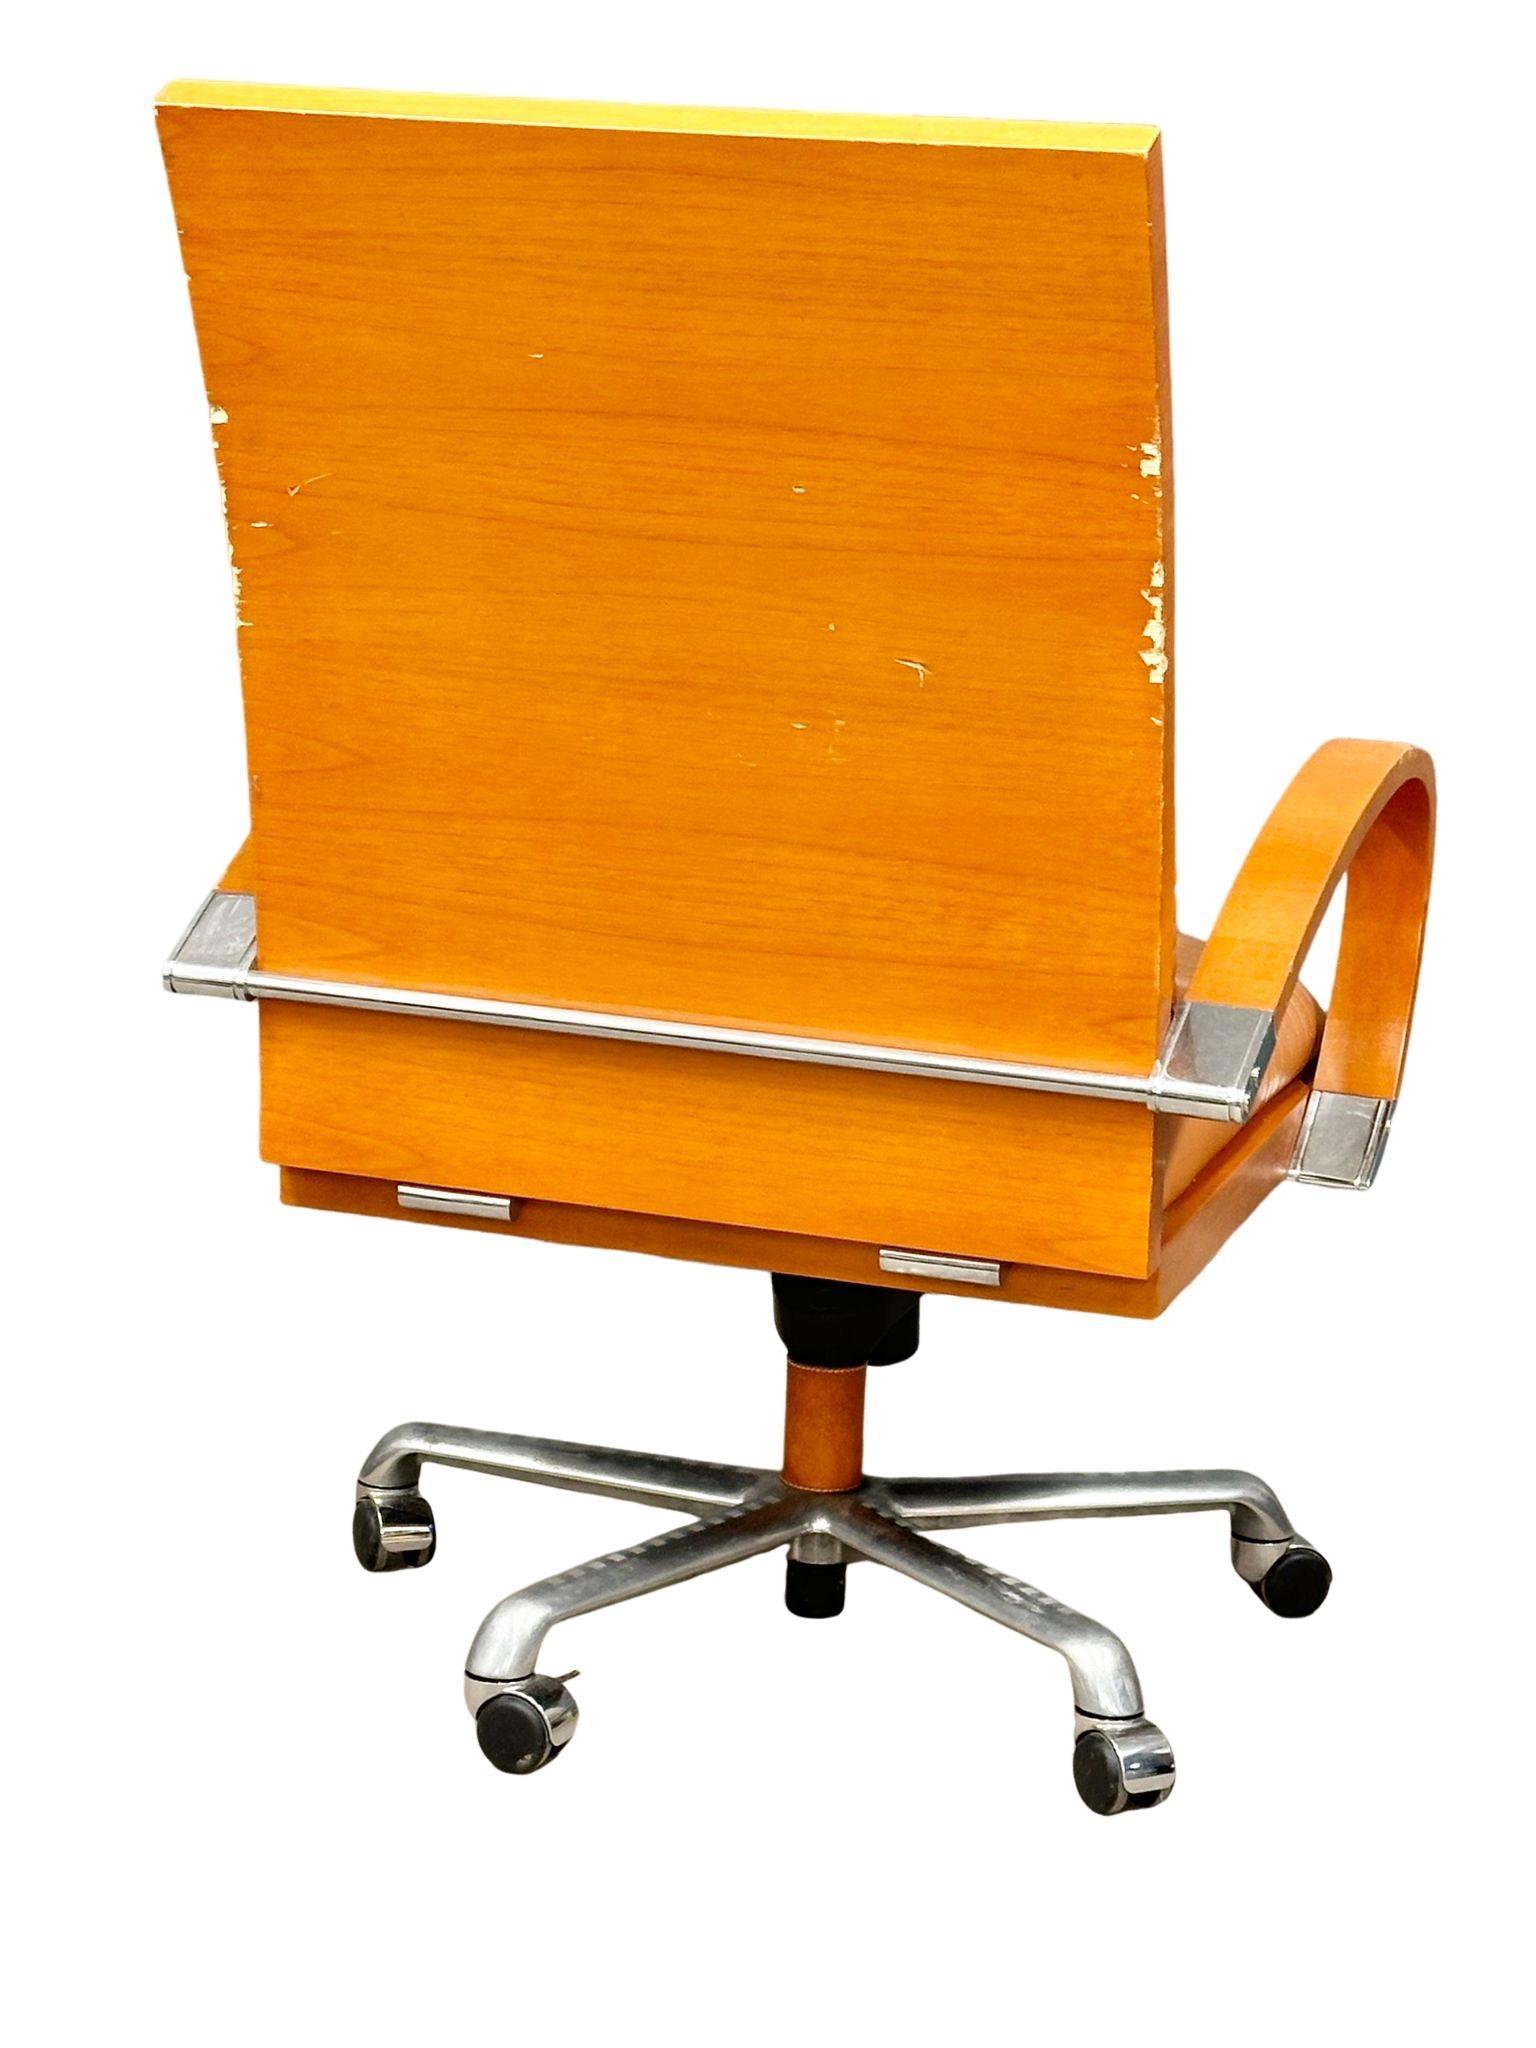 A large ‘Casablanca’ desk chair designed by Jaime Tresserra for the Tresserra Collection. 1987. - Image 4 of 7